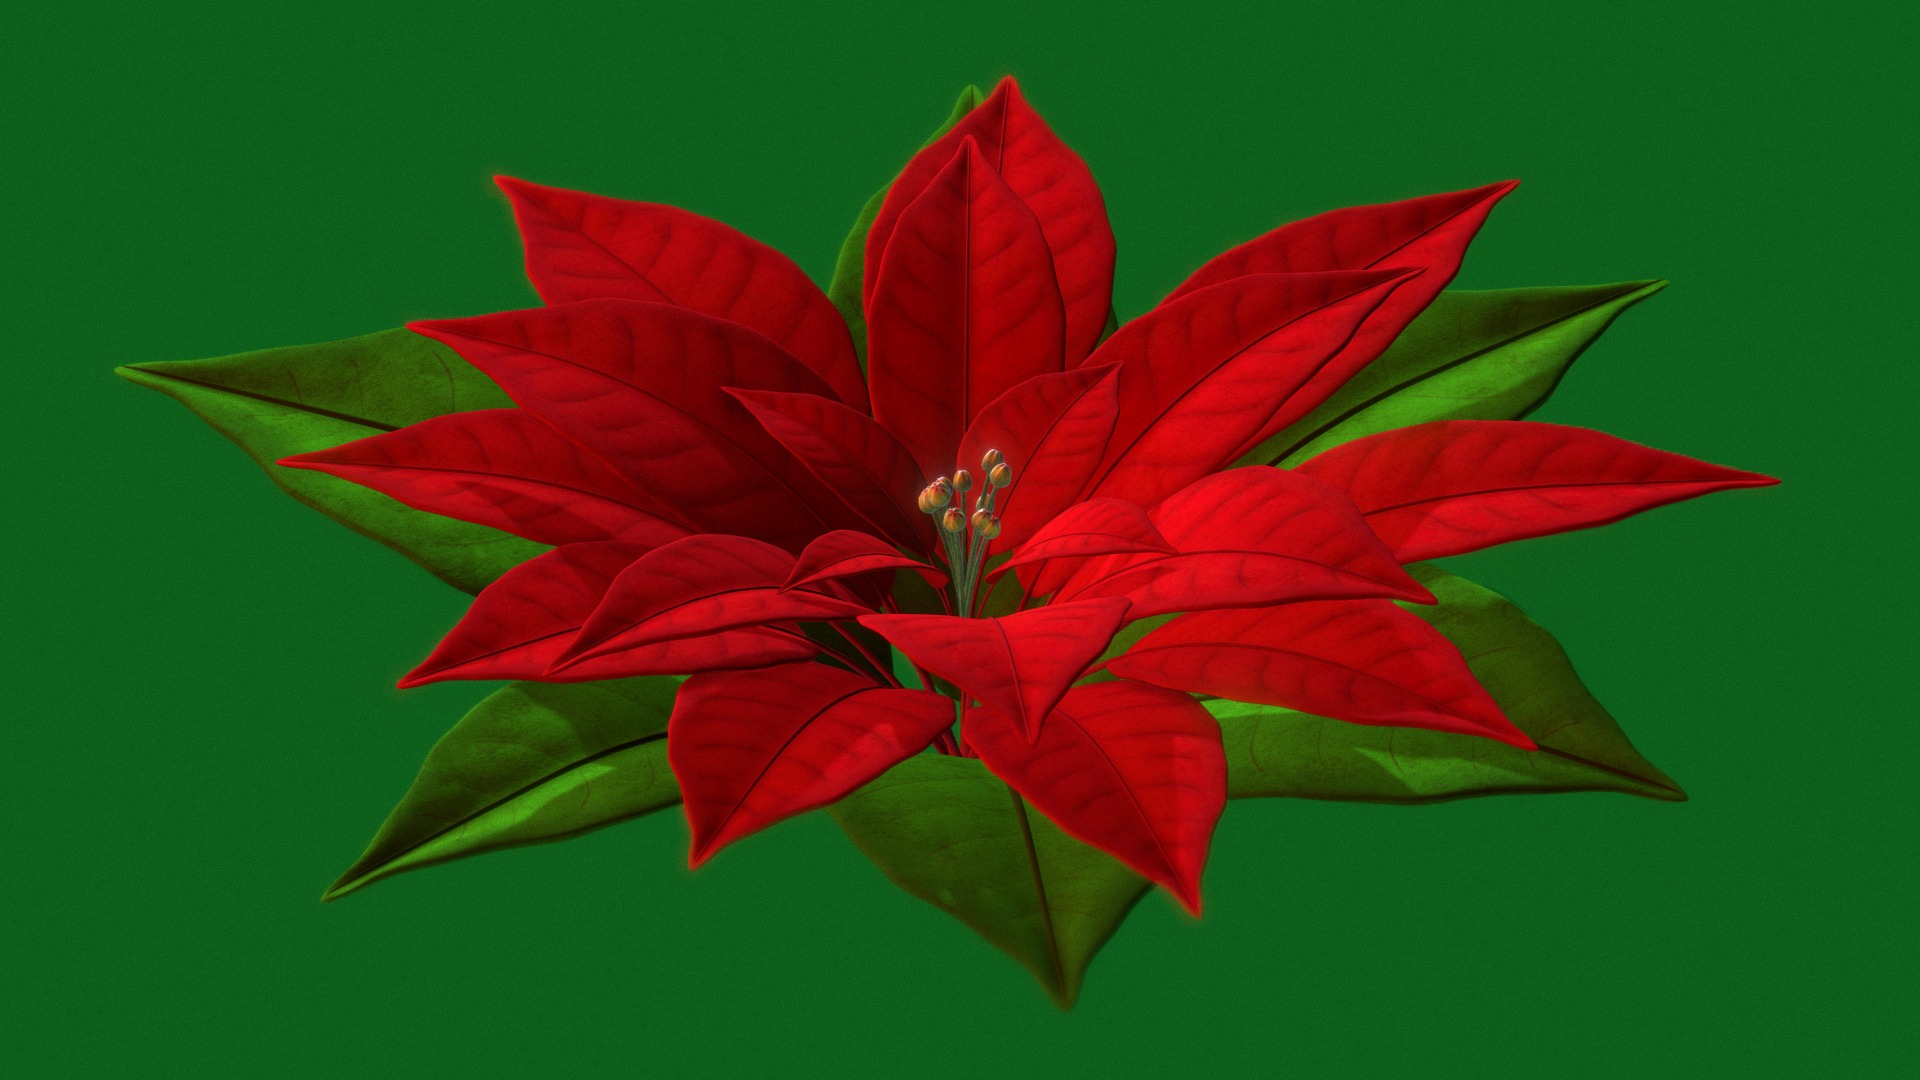 3D model NOCHE BUENA - This is a 3D model of the NOCHE BUENA. The 3D model is about a red flower with green leaves.